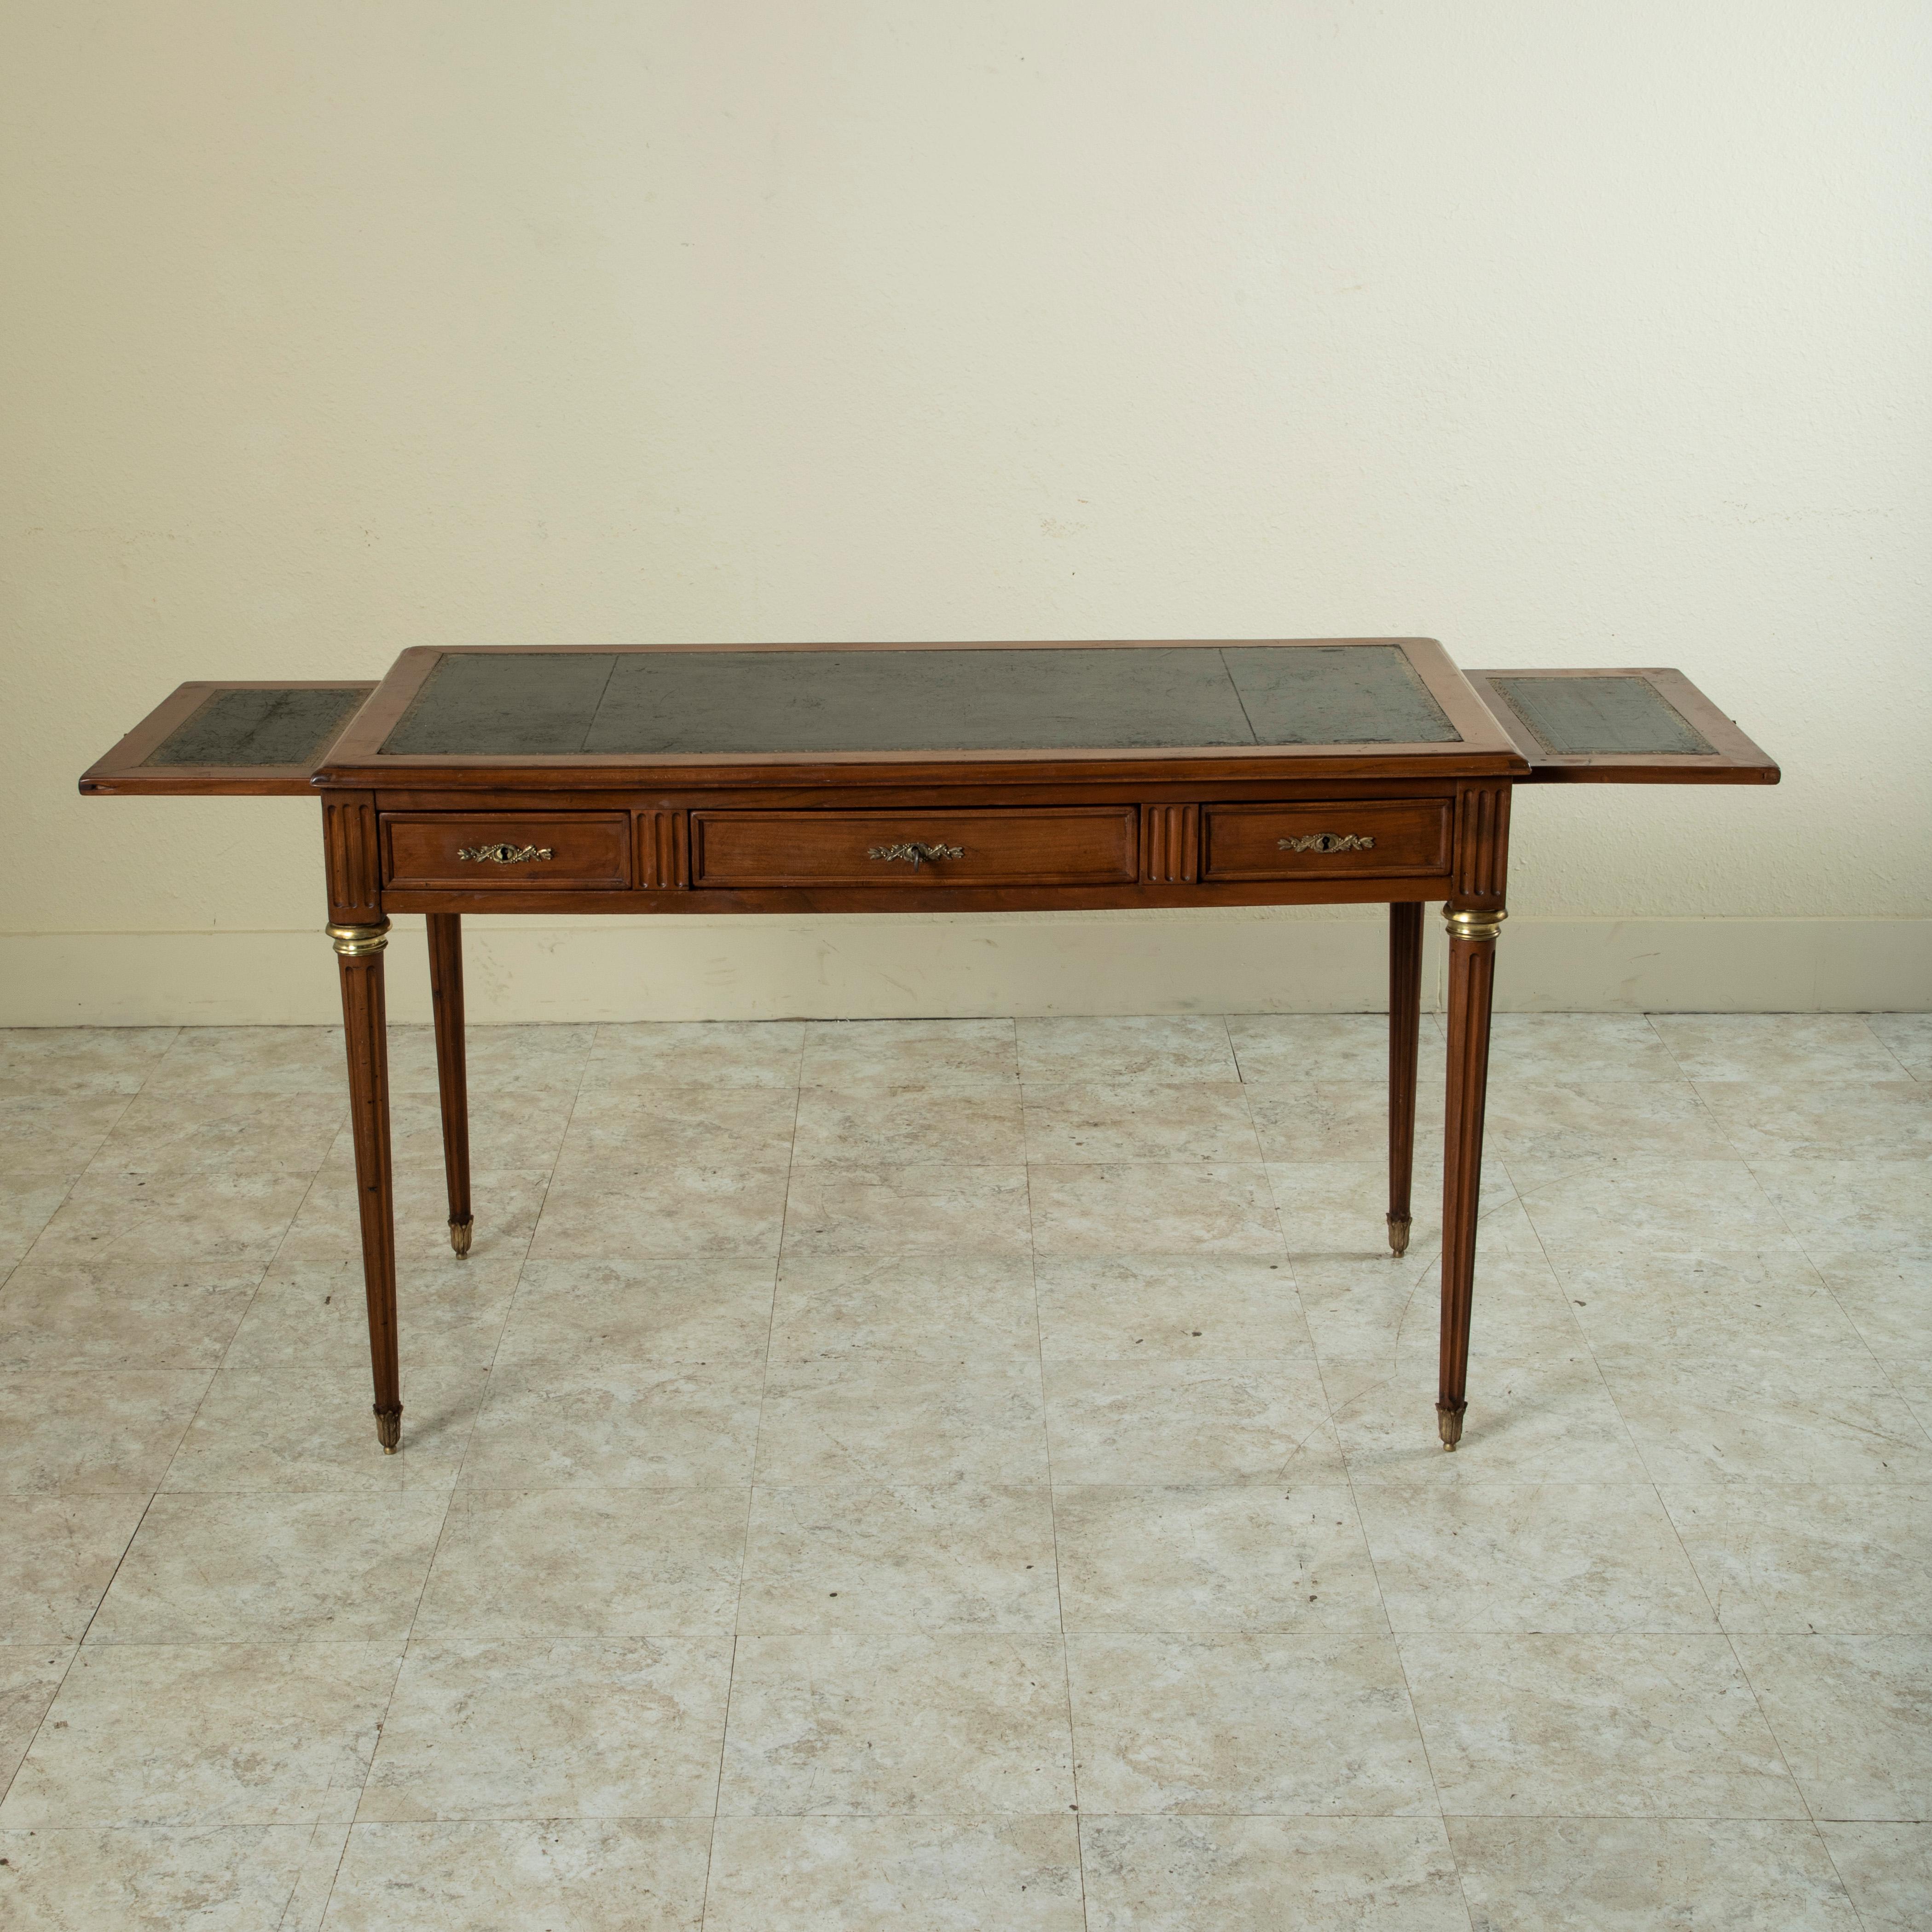 Early 20th Century French Louis XVI Style Cherrywood Desk, Tooled Leather Top 5